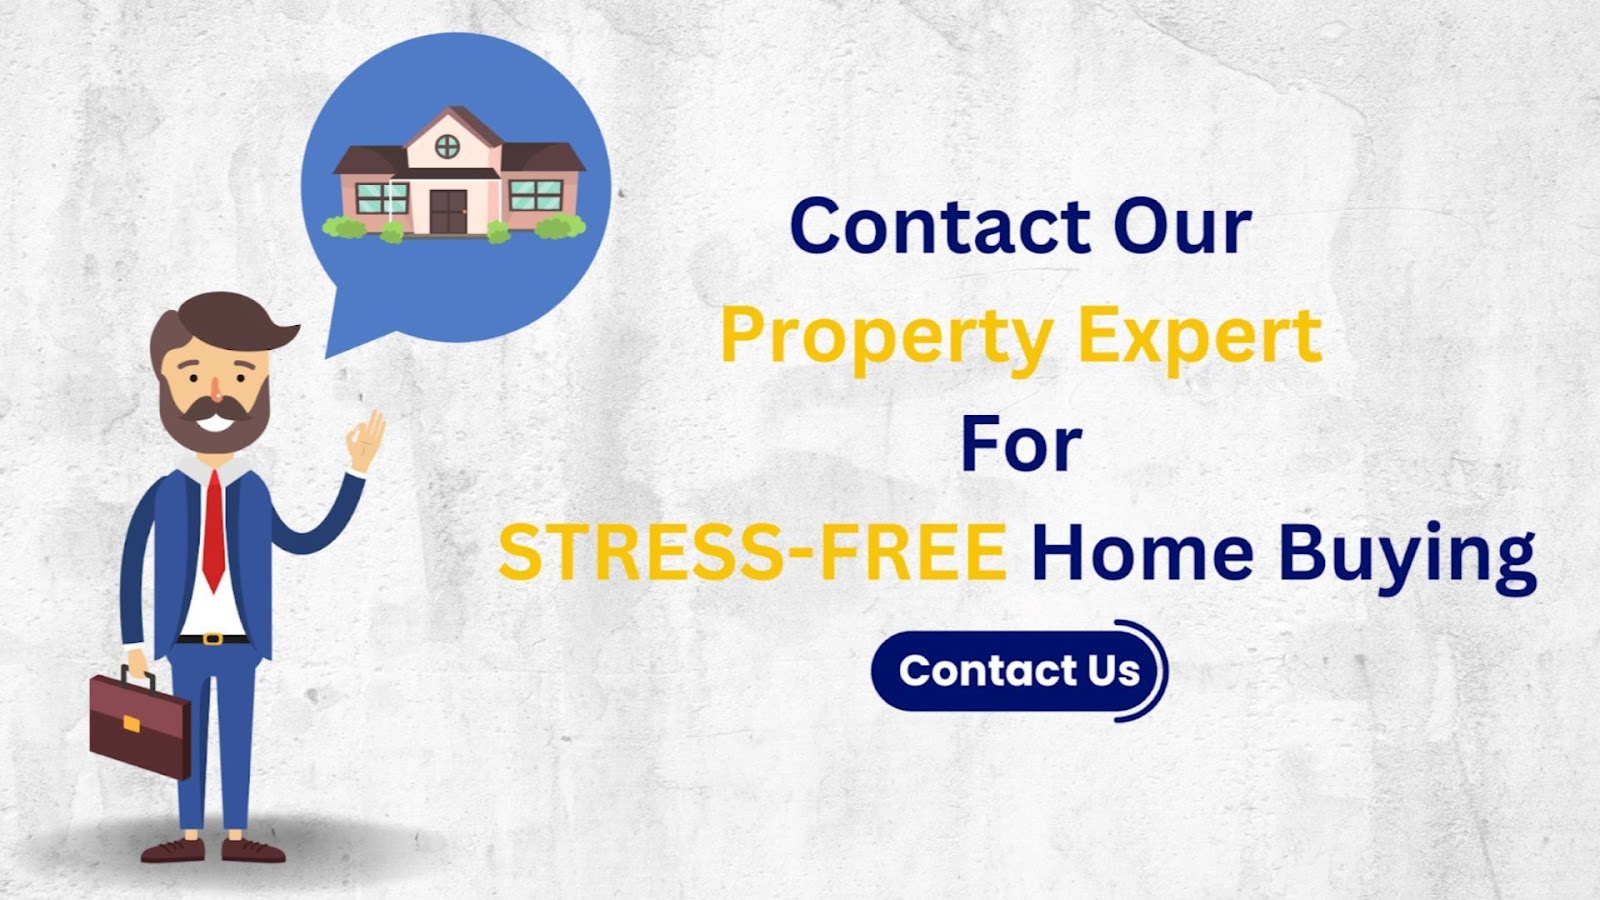 Contact the property expert at PropertyCloud to get guidance related to property.